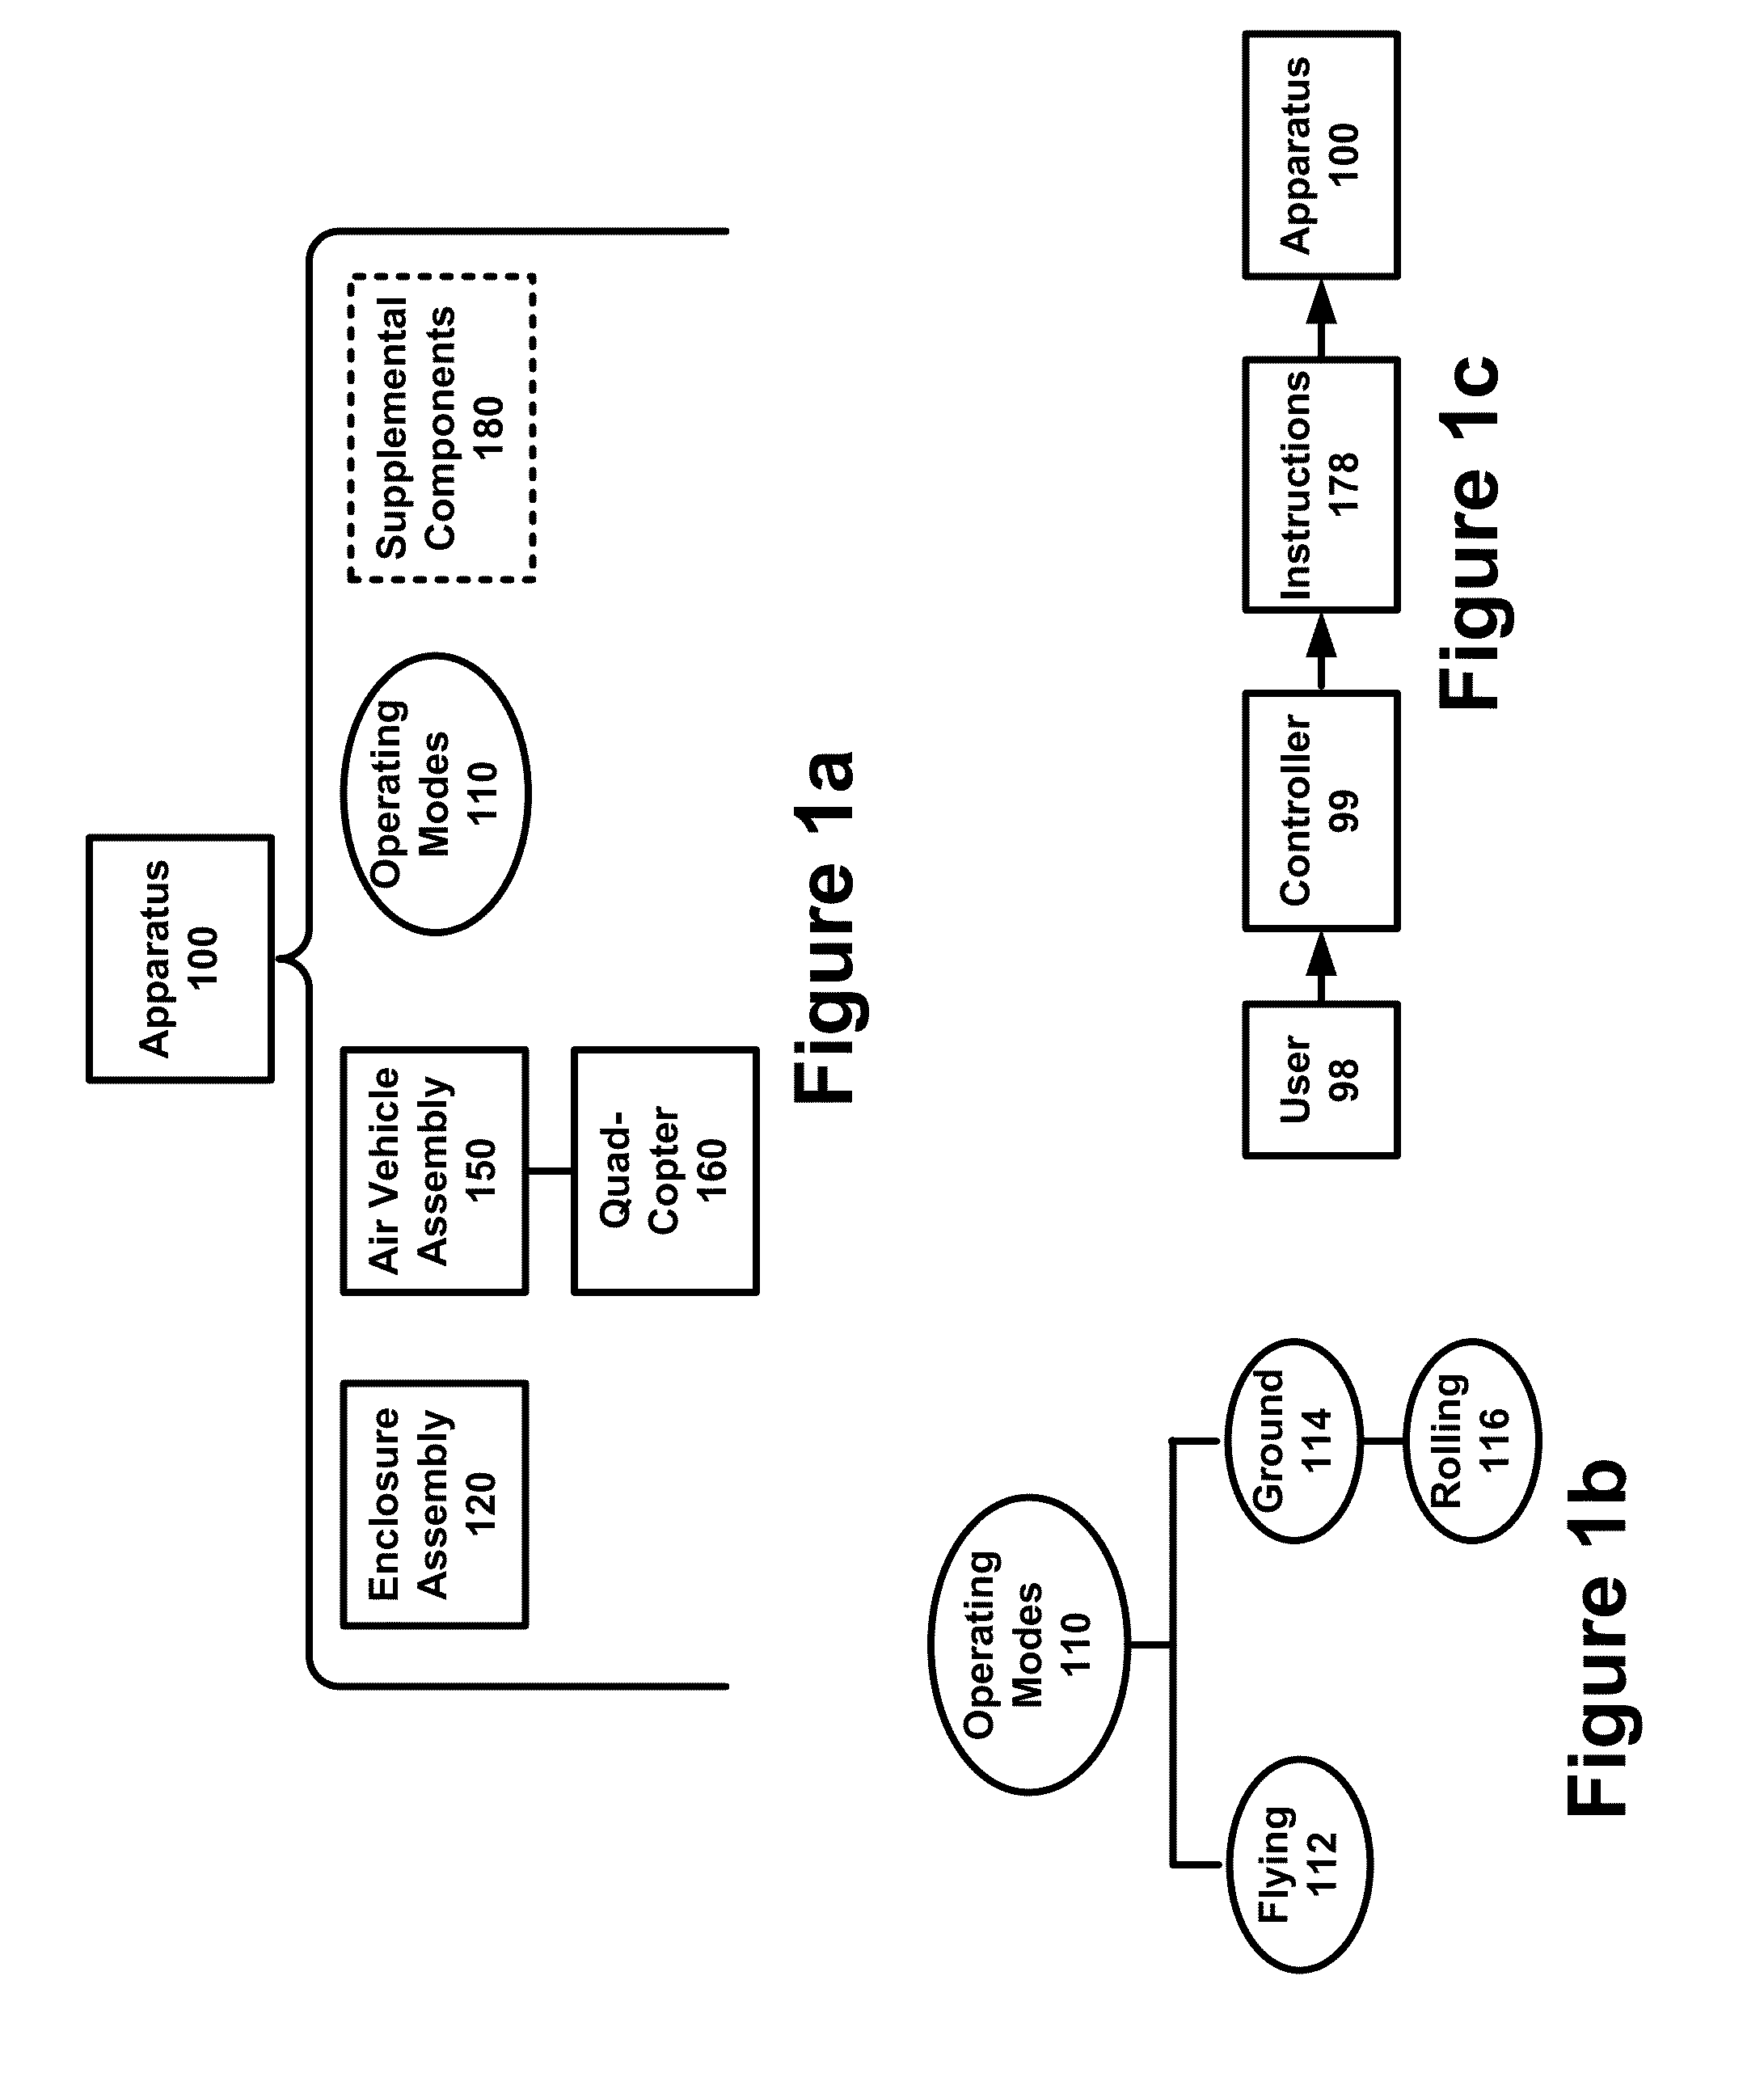 Enclosed drone apparatus and method for use thereof